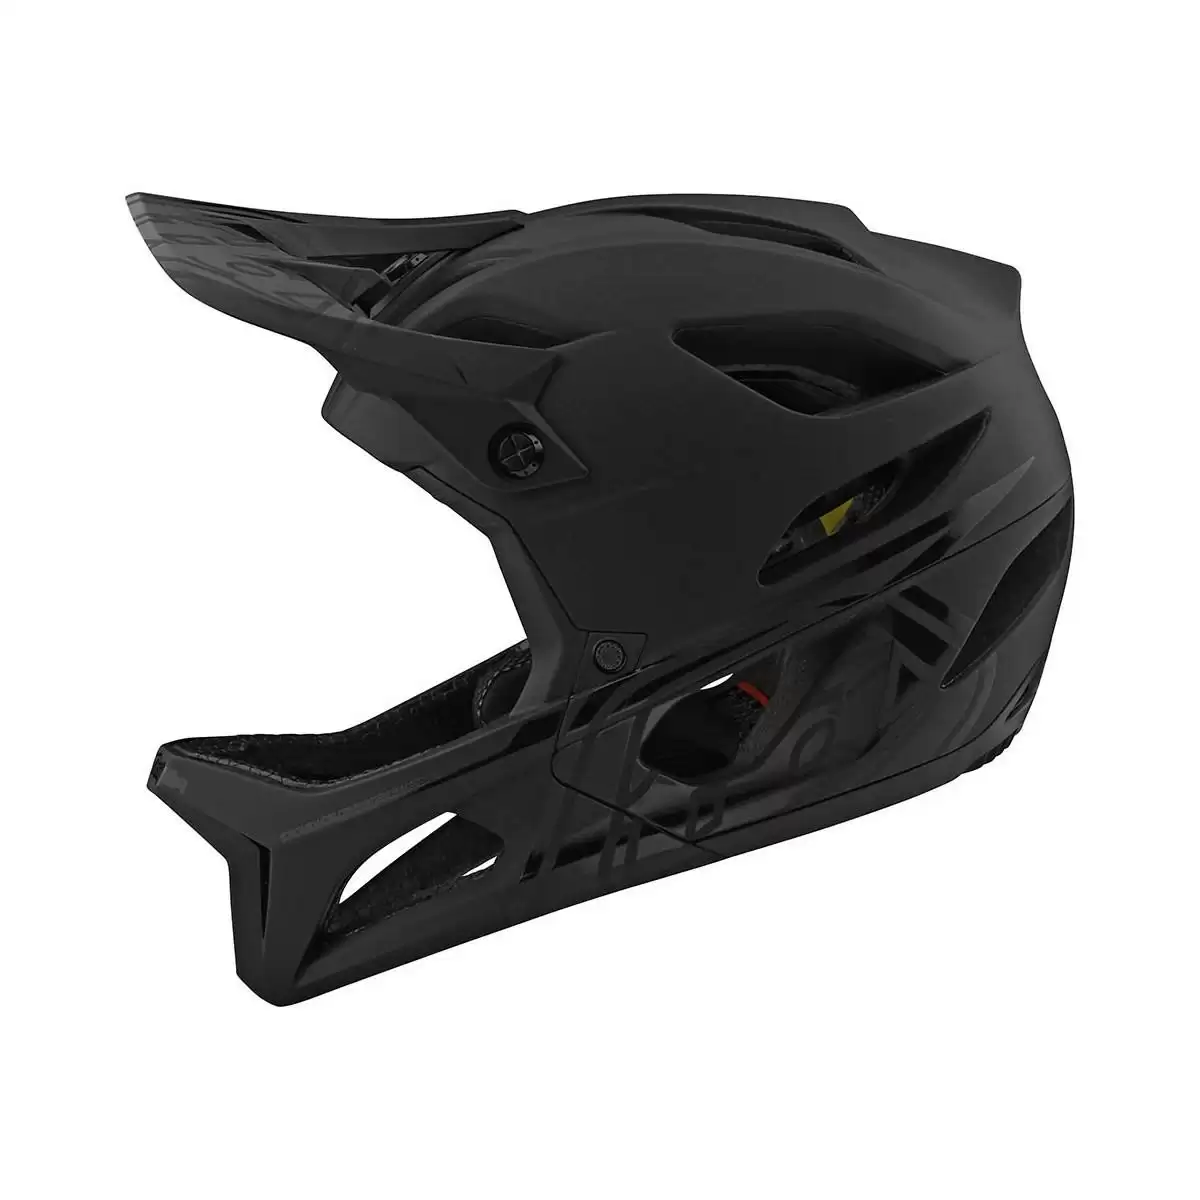 Capacete Facial Stage MIPS Stealth Midnight Black Tamanho M/L (57-59cm) - image